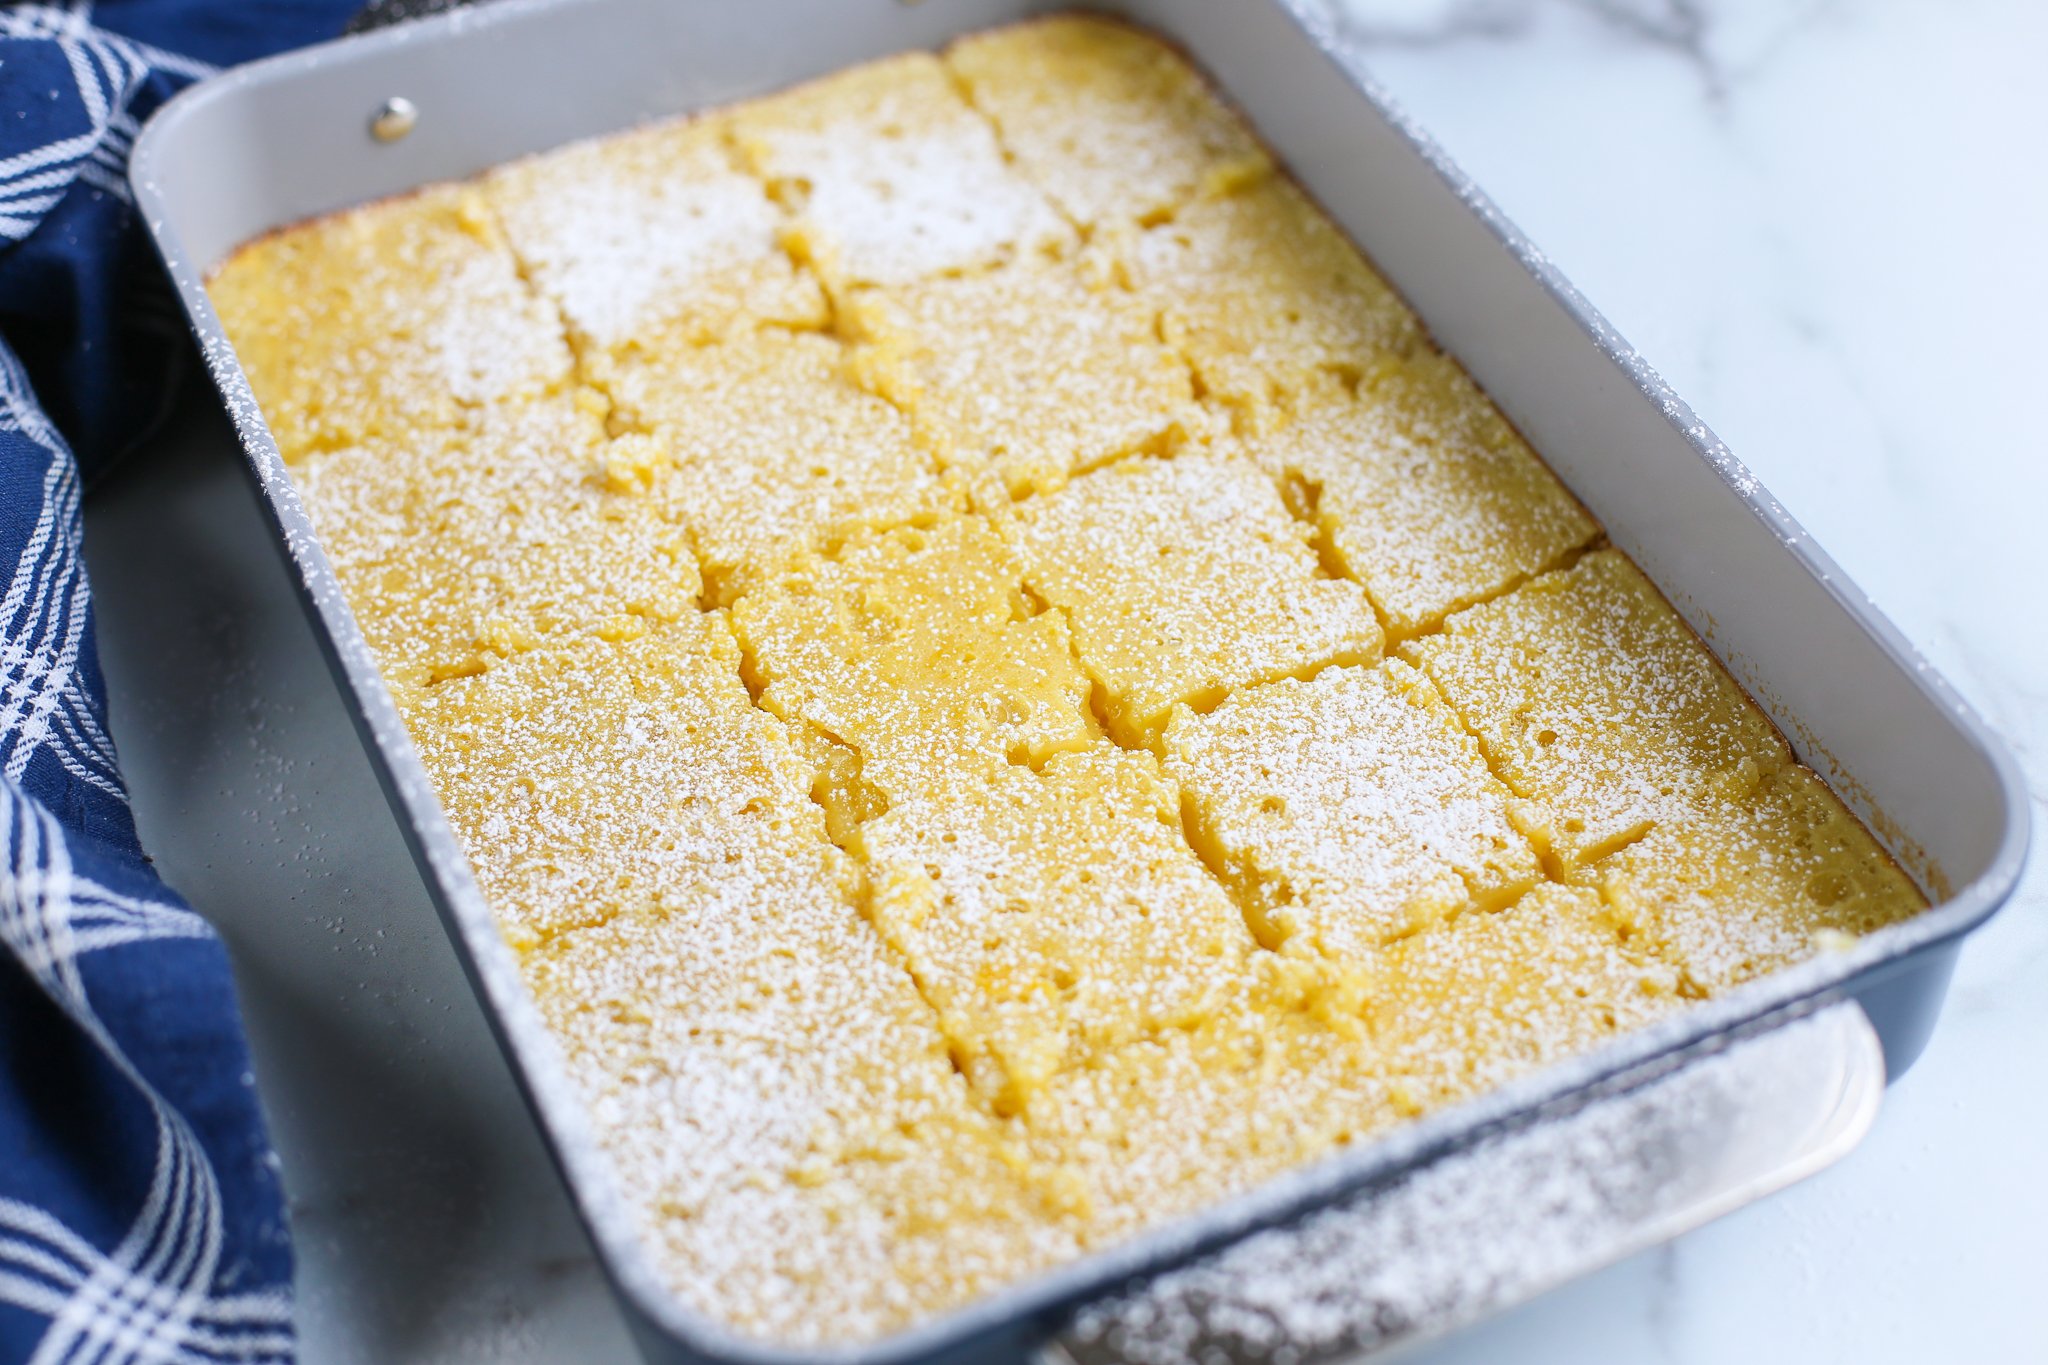 Baked lemon bars sprinkled with powdered sugar and cut in 12 squares.